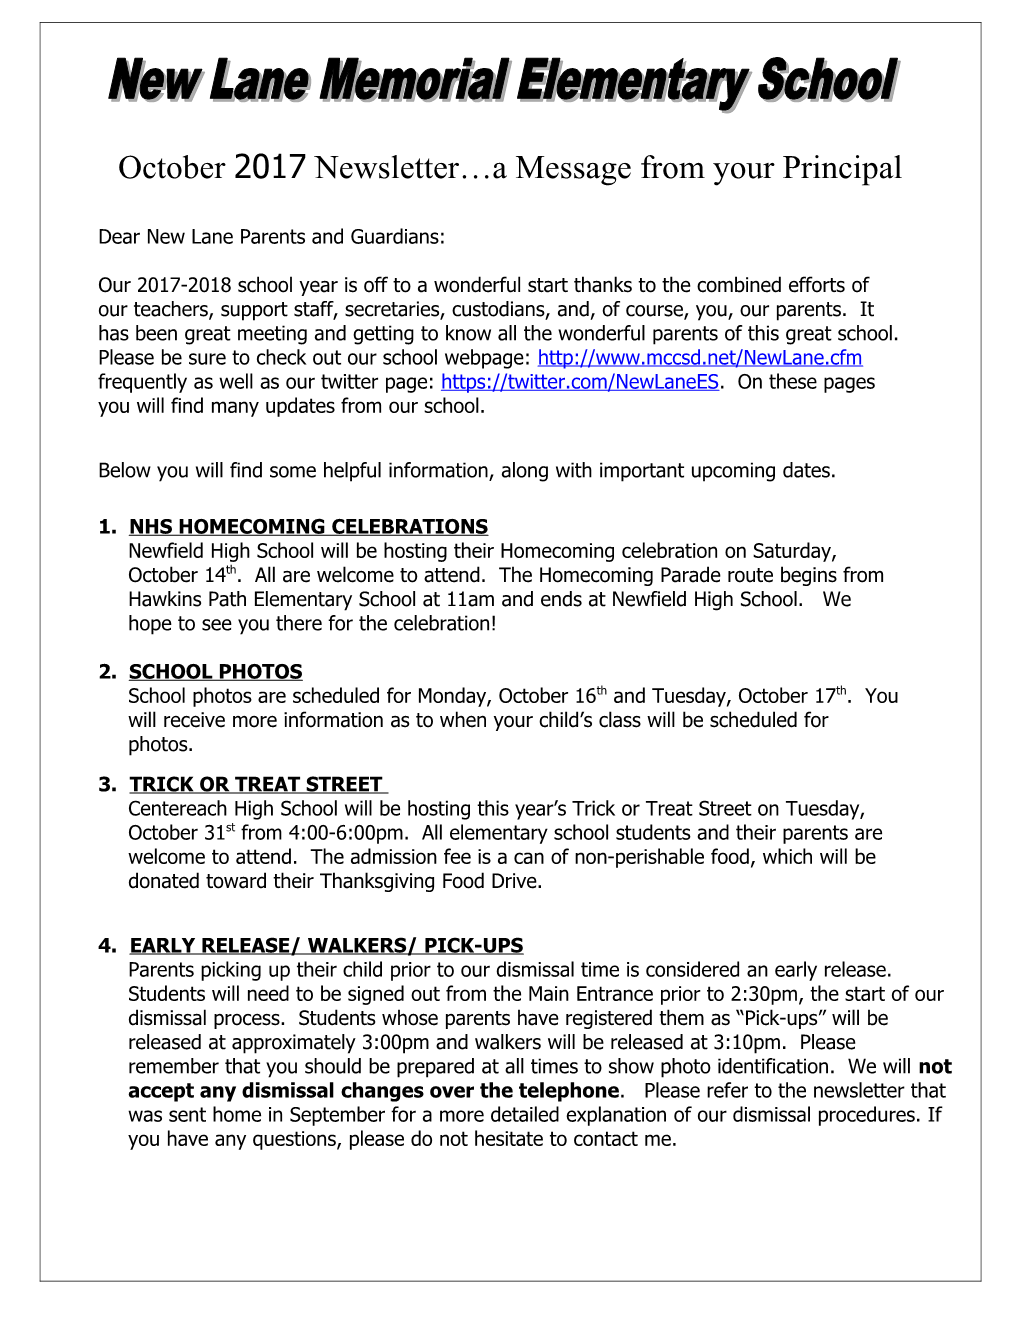 October 2017 Newsletter a Message from Your Principal